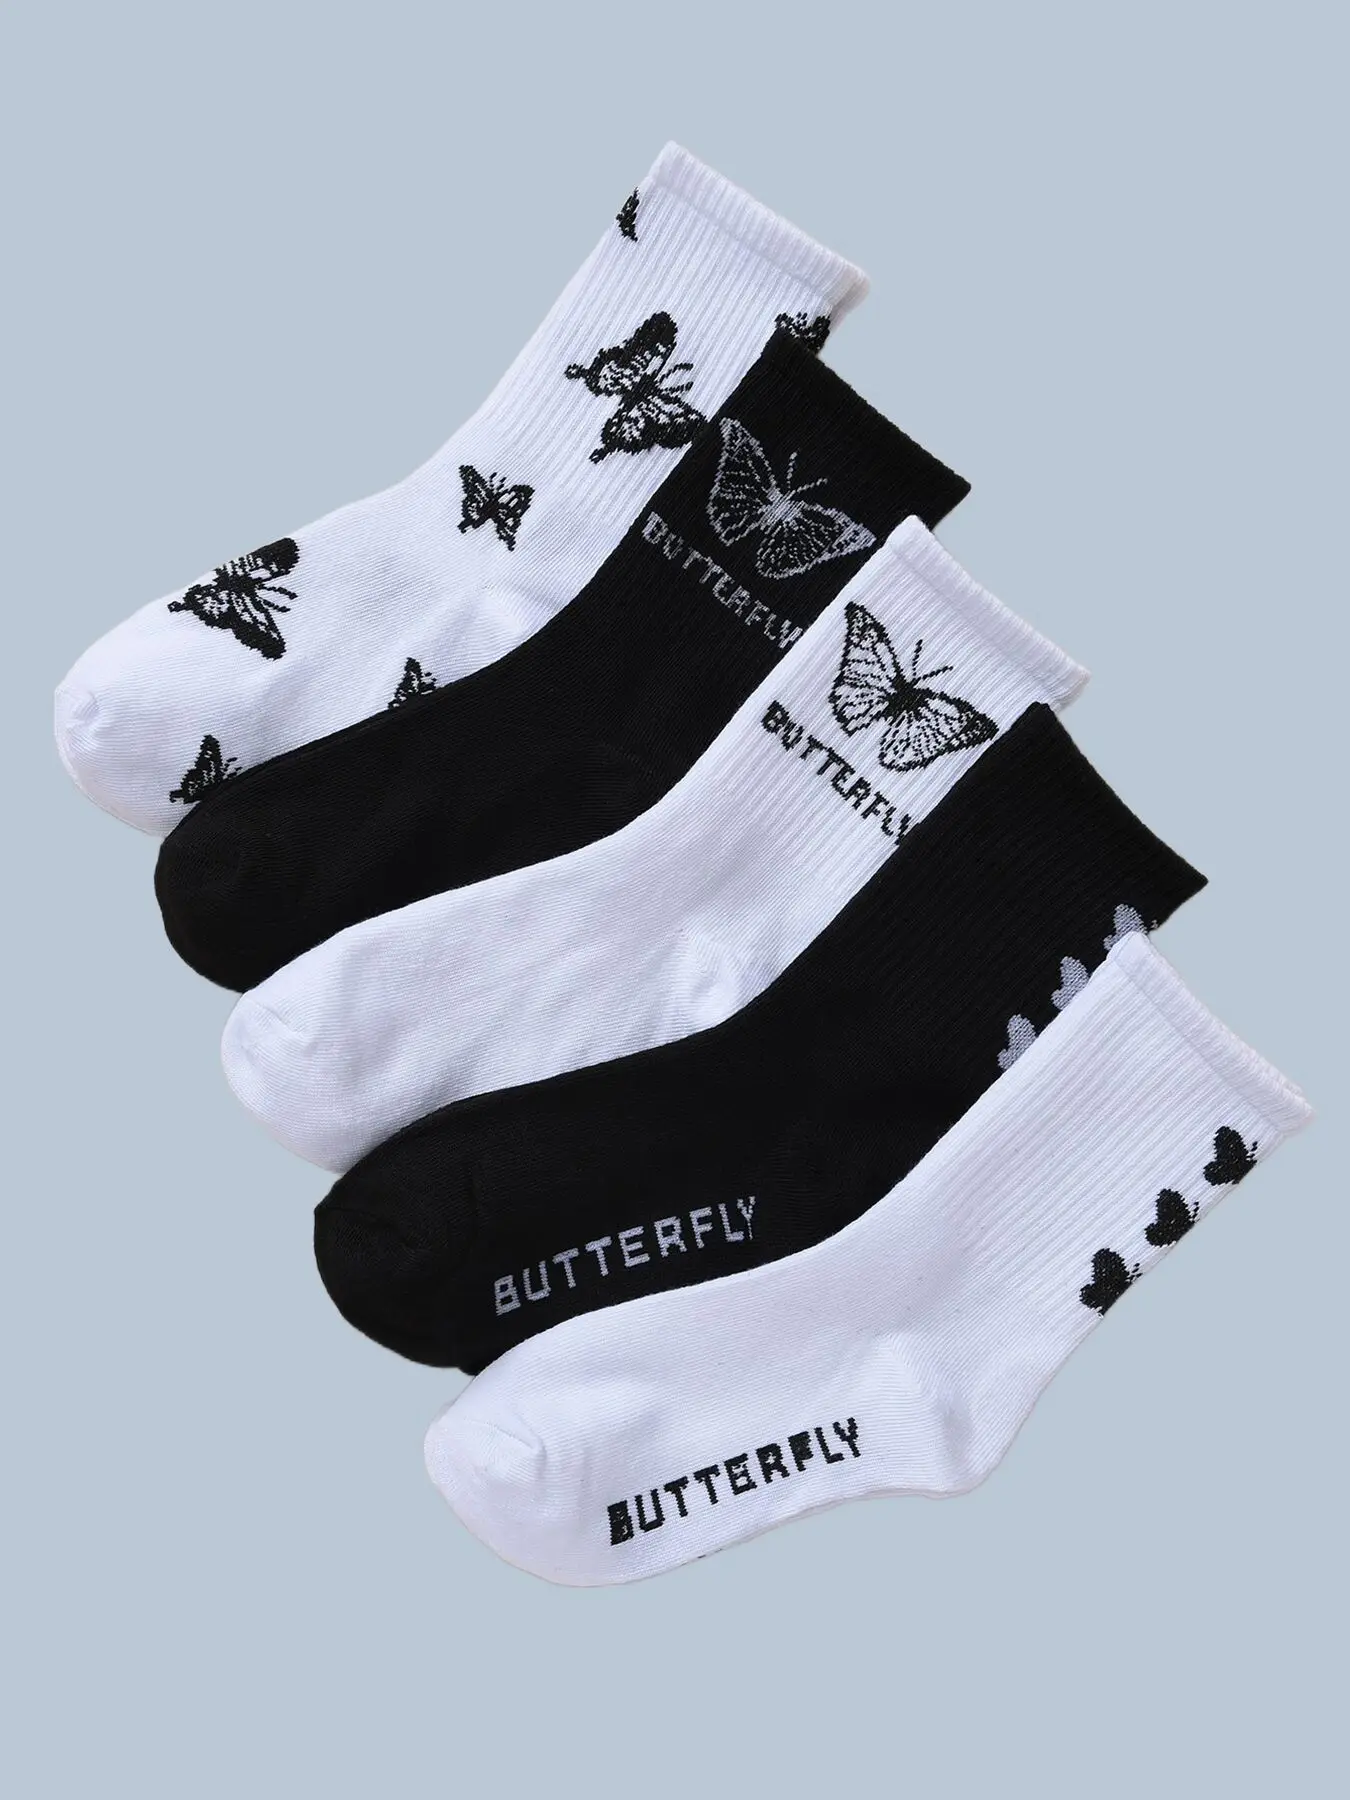 

5 Pairs New Women's High Quality Fashion Cotton Socks Mid Length Stockings Set in With Butterfly Pattern Popular Versatile Socks